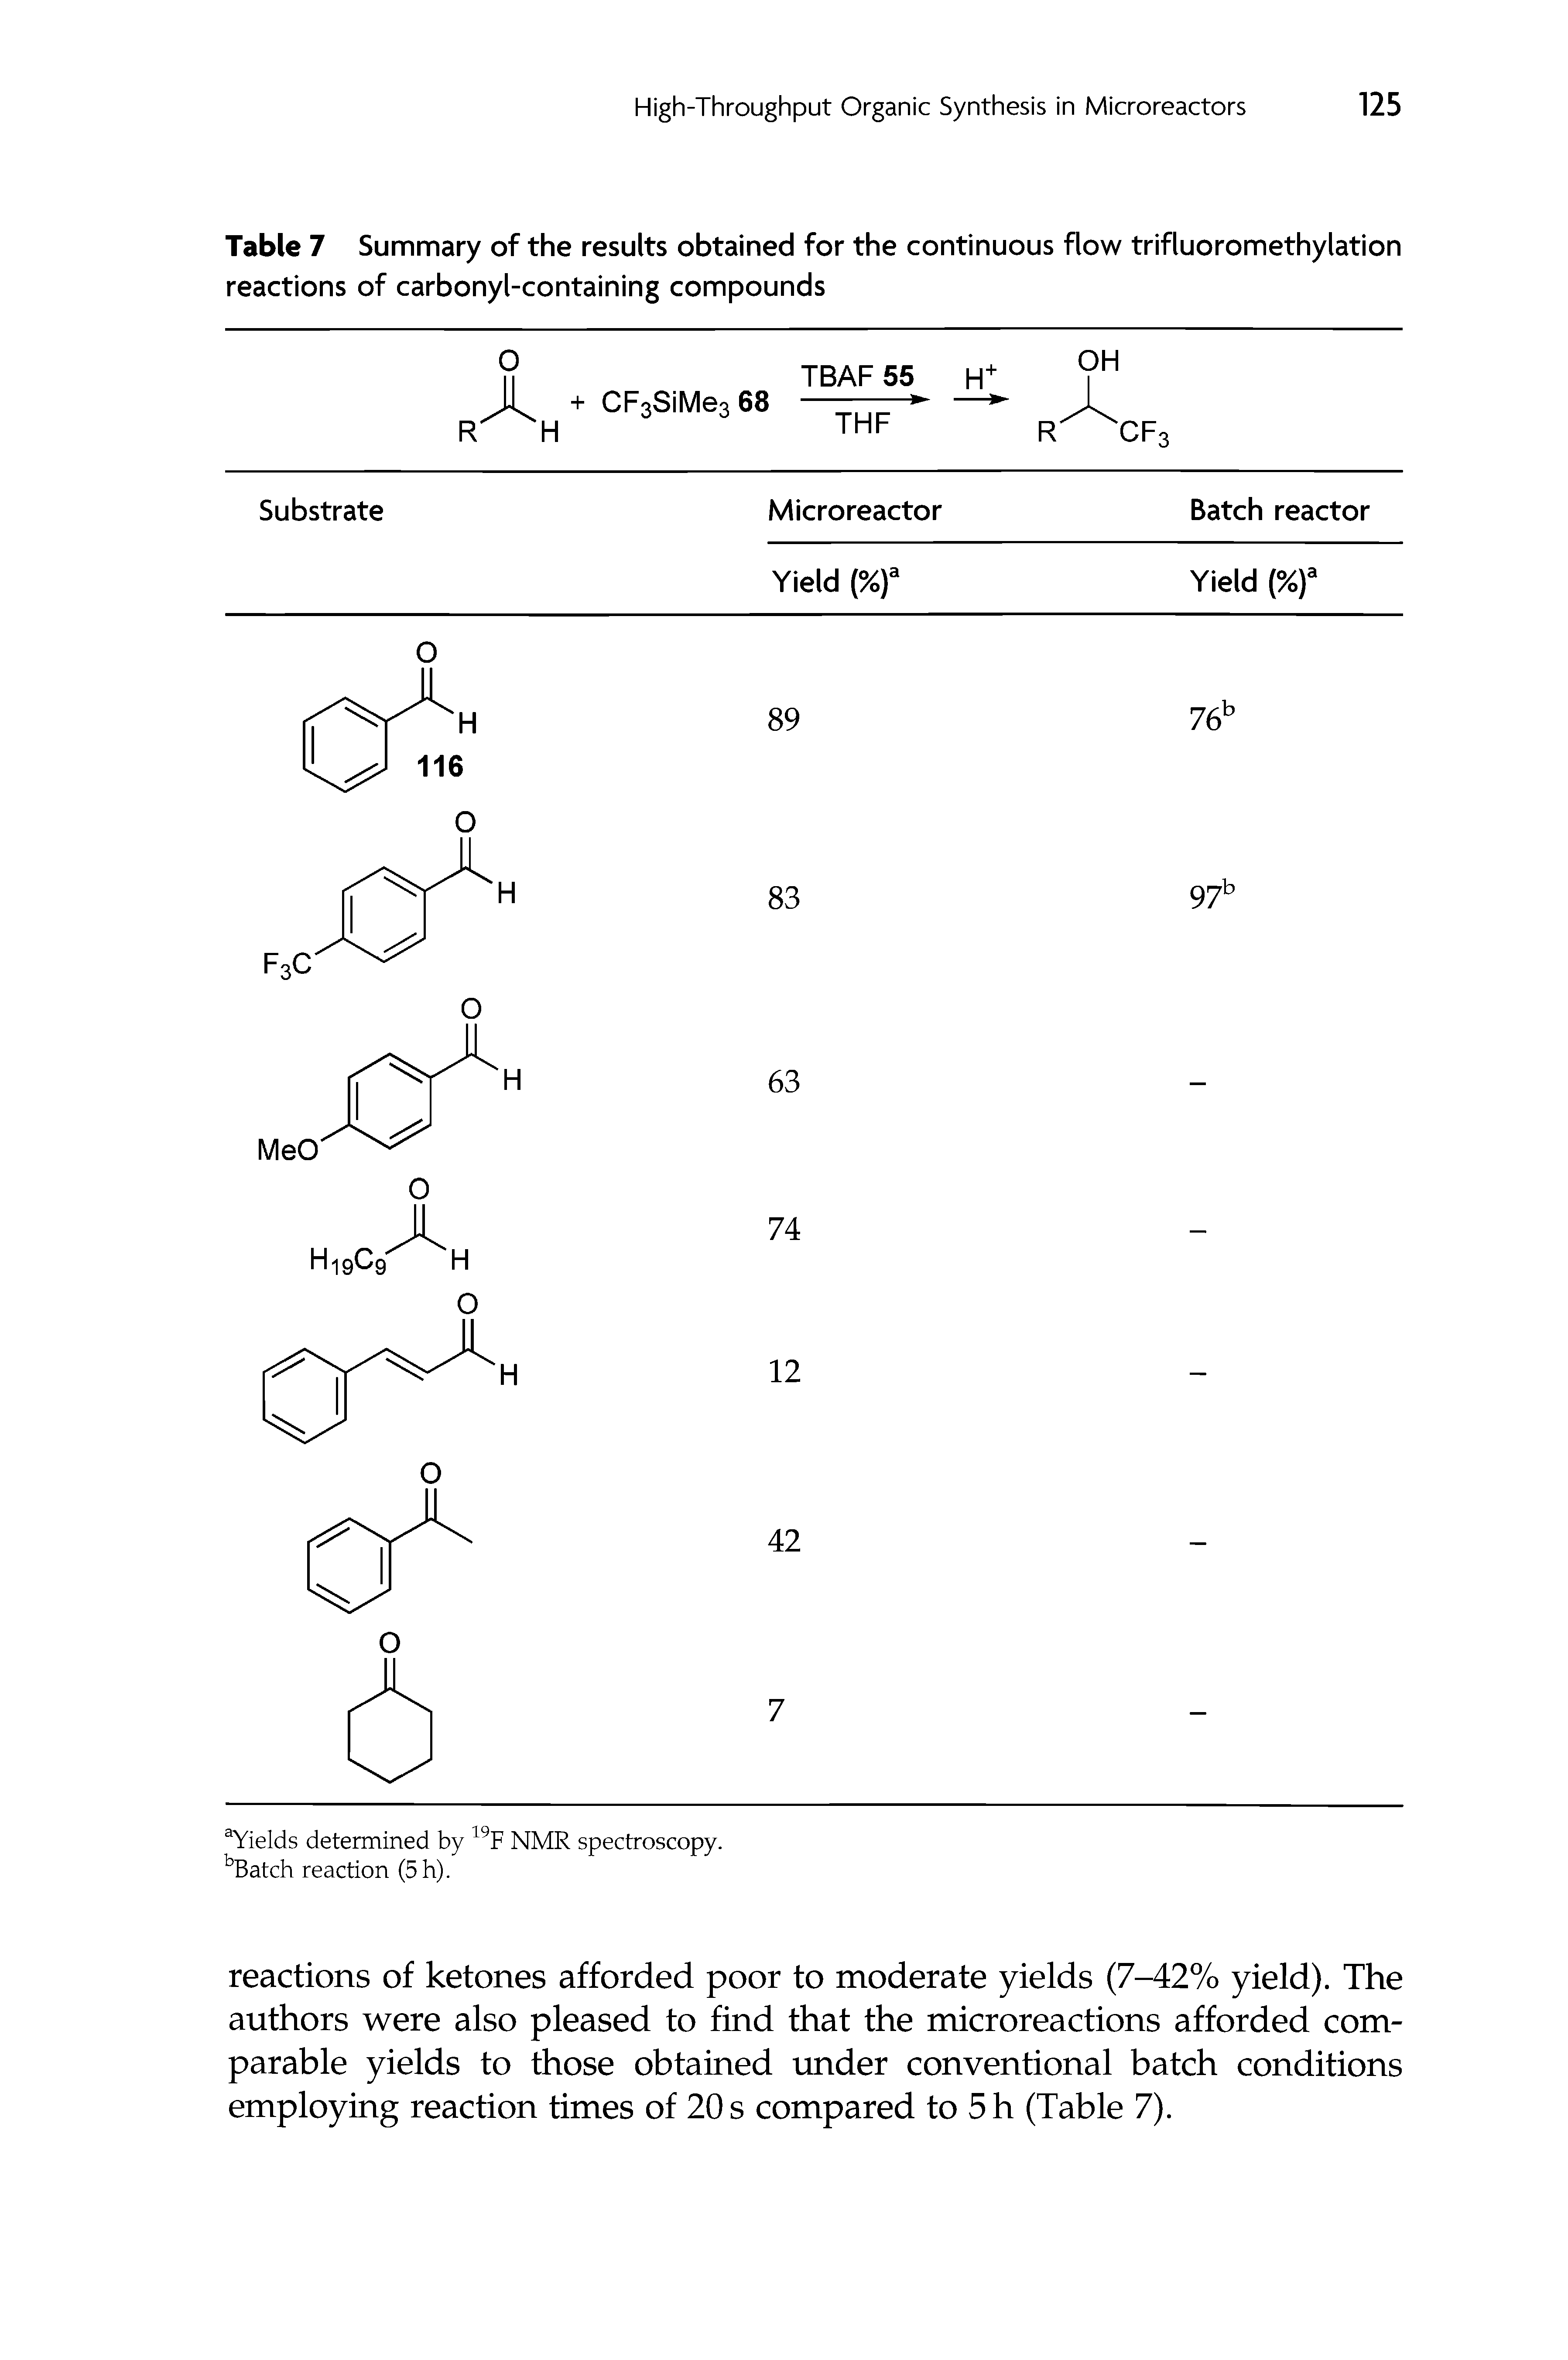 Table 7 Summary of the results obtained for the continuous flow trifluoromethylation reactions of carbonyl-containing compounds...